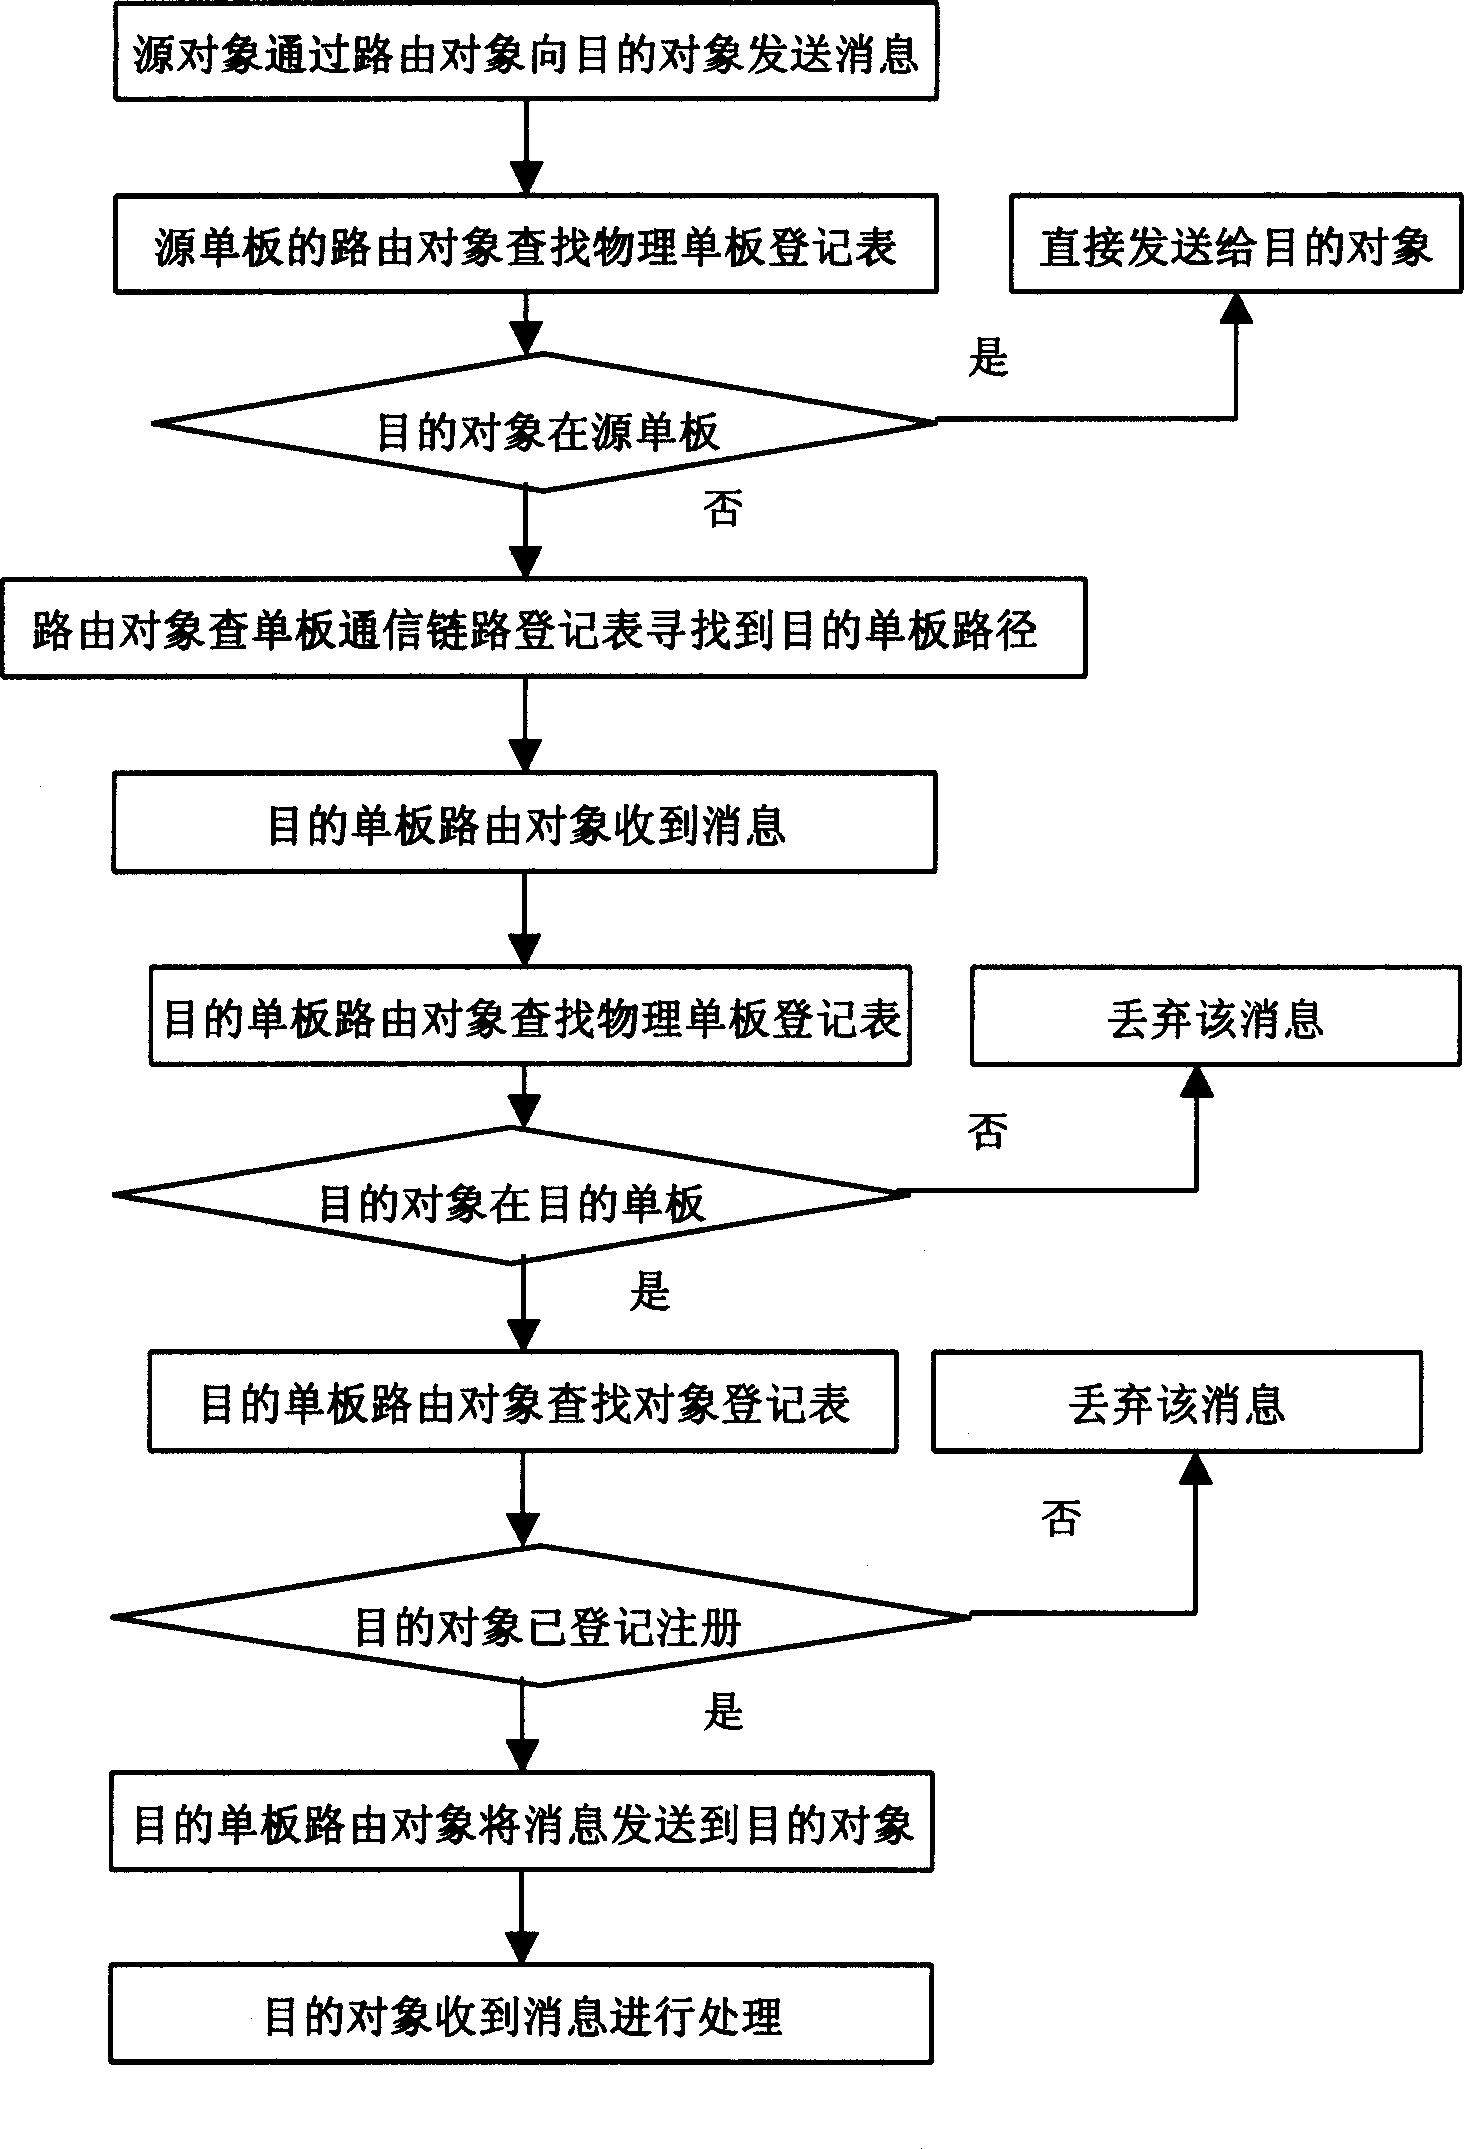 Board to board communication between distribution system objects